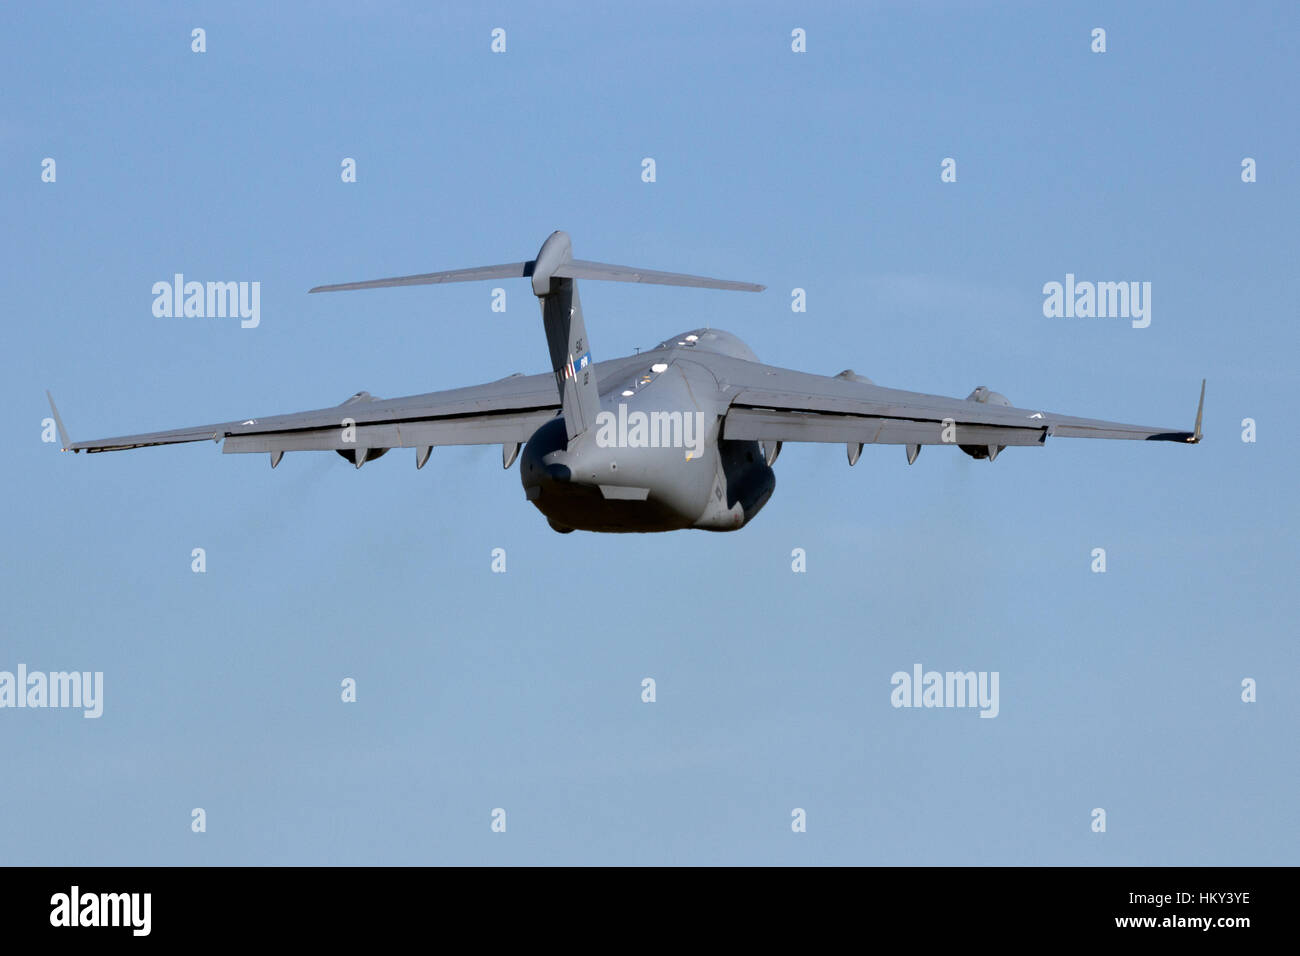 GILZE RIJEN, NETHERLANDS - SEP 7, 2016: Hungarian Air Force Boeing C-17 Globemaster III take off. The plane belongs to SAC and is used by a consortium Stock Photo